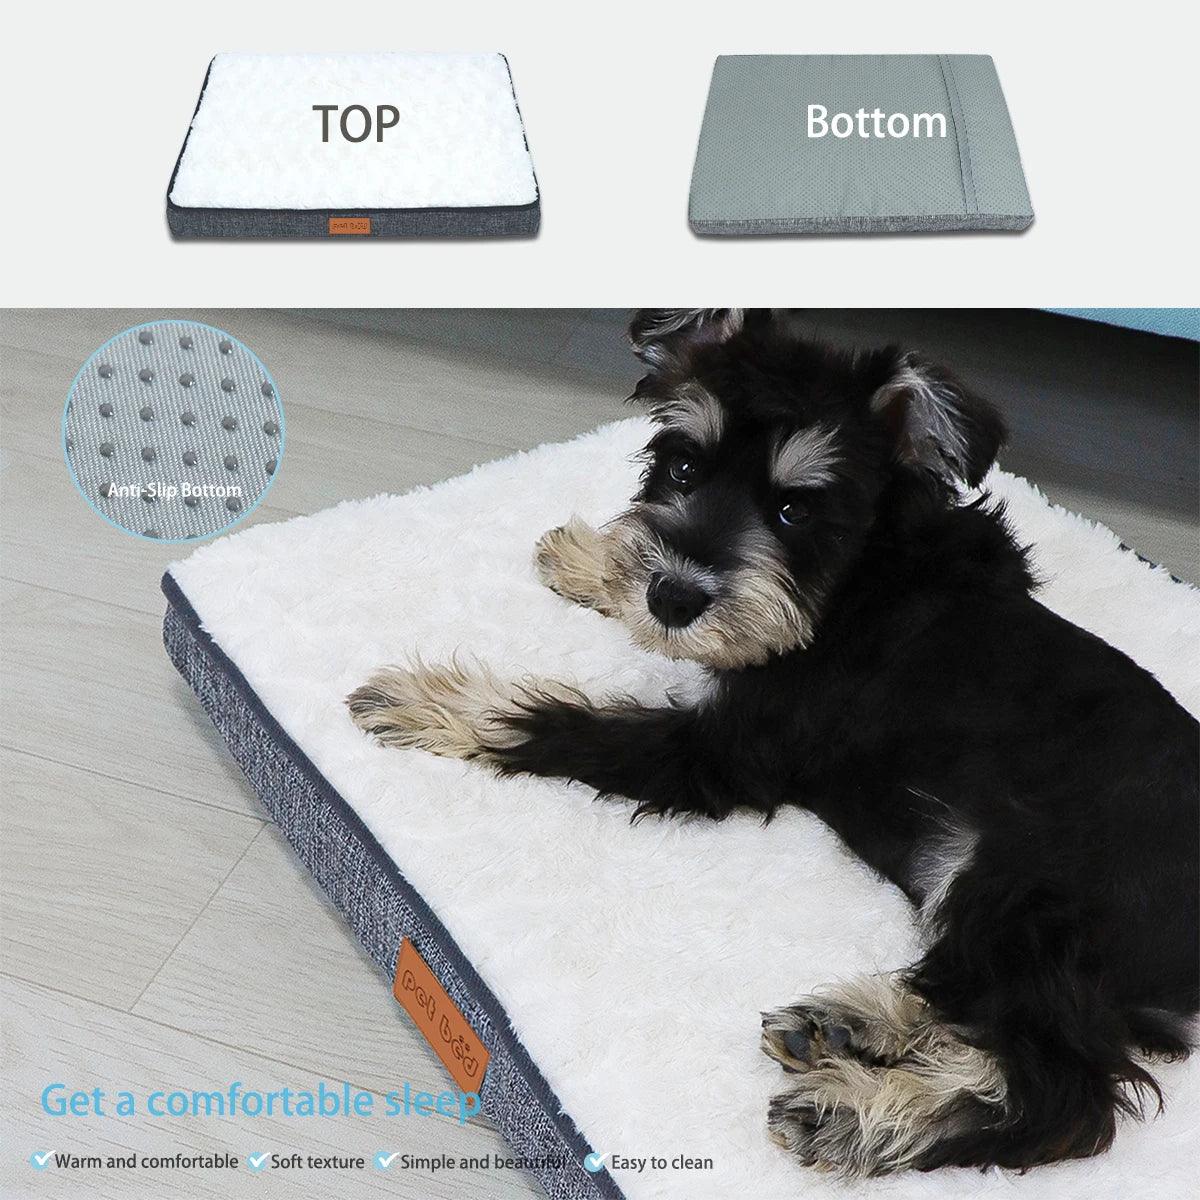 Memory Foam Orthopedic Dog Bed with Faux Fur Cover - MR. GIFT